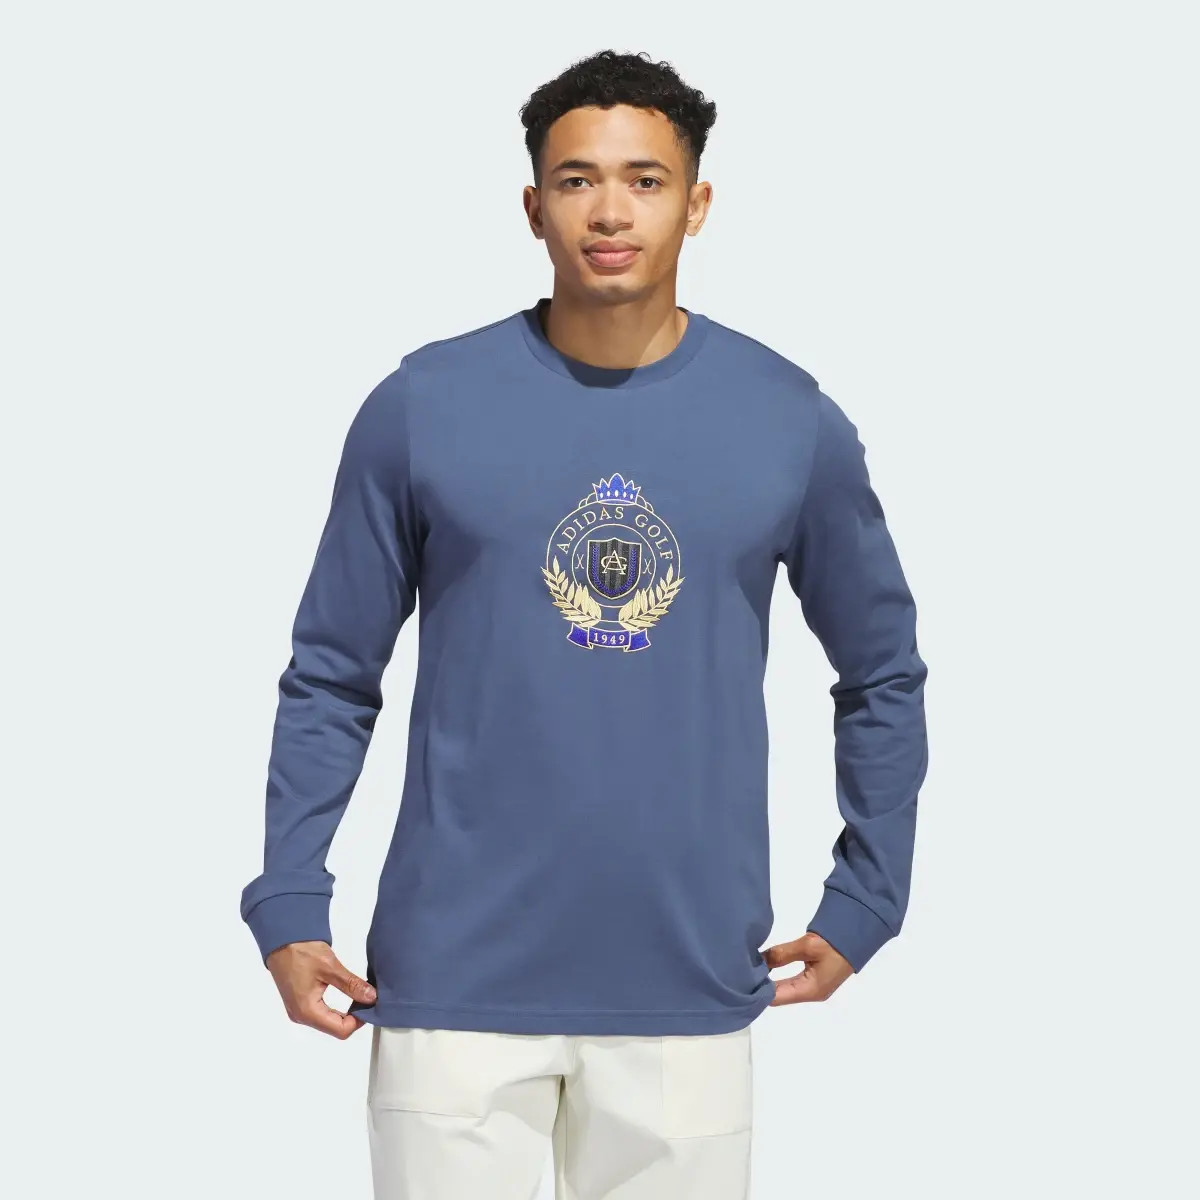 Adidas Go-To Crest Graphic Long Sleeve T-Shirt. 2